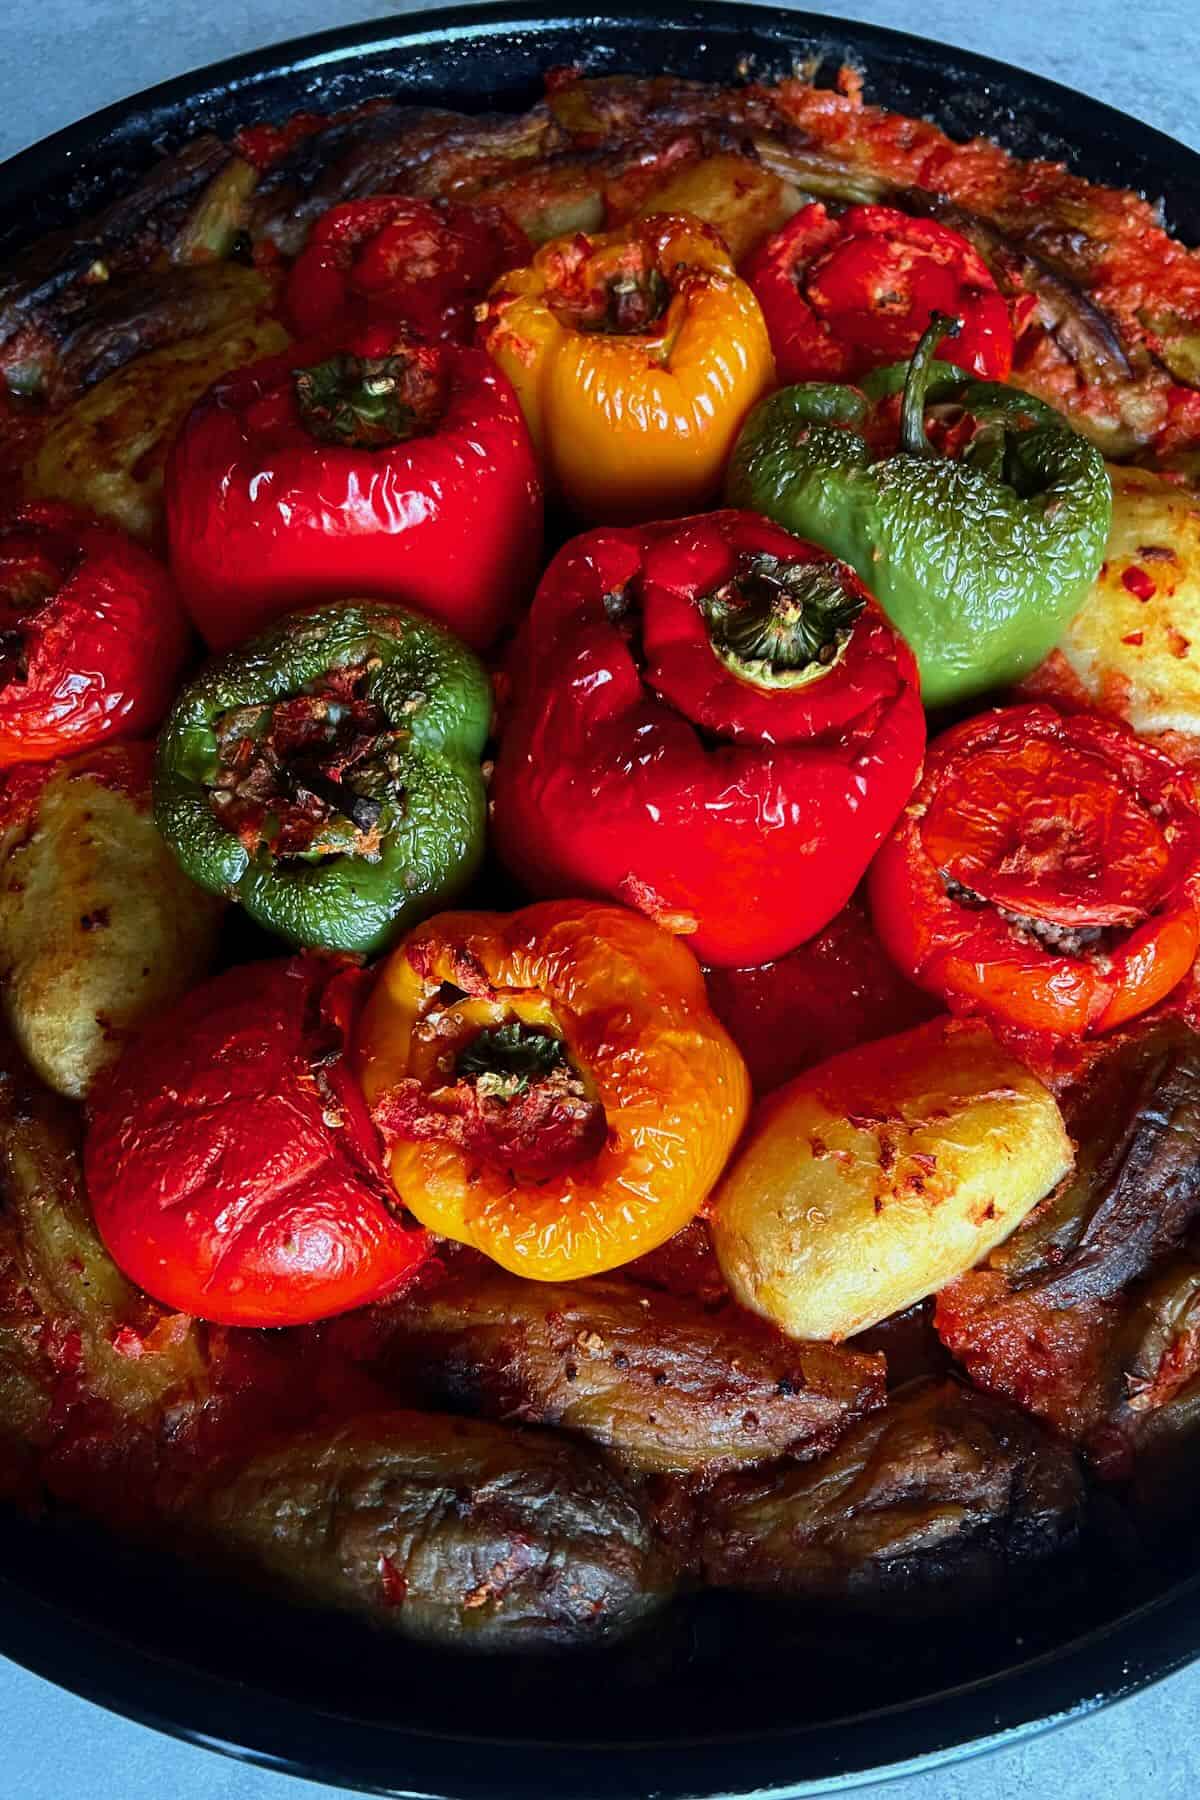 Stuffed veggies with meat in a baking dish